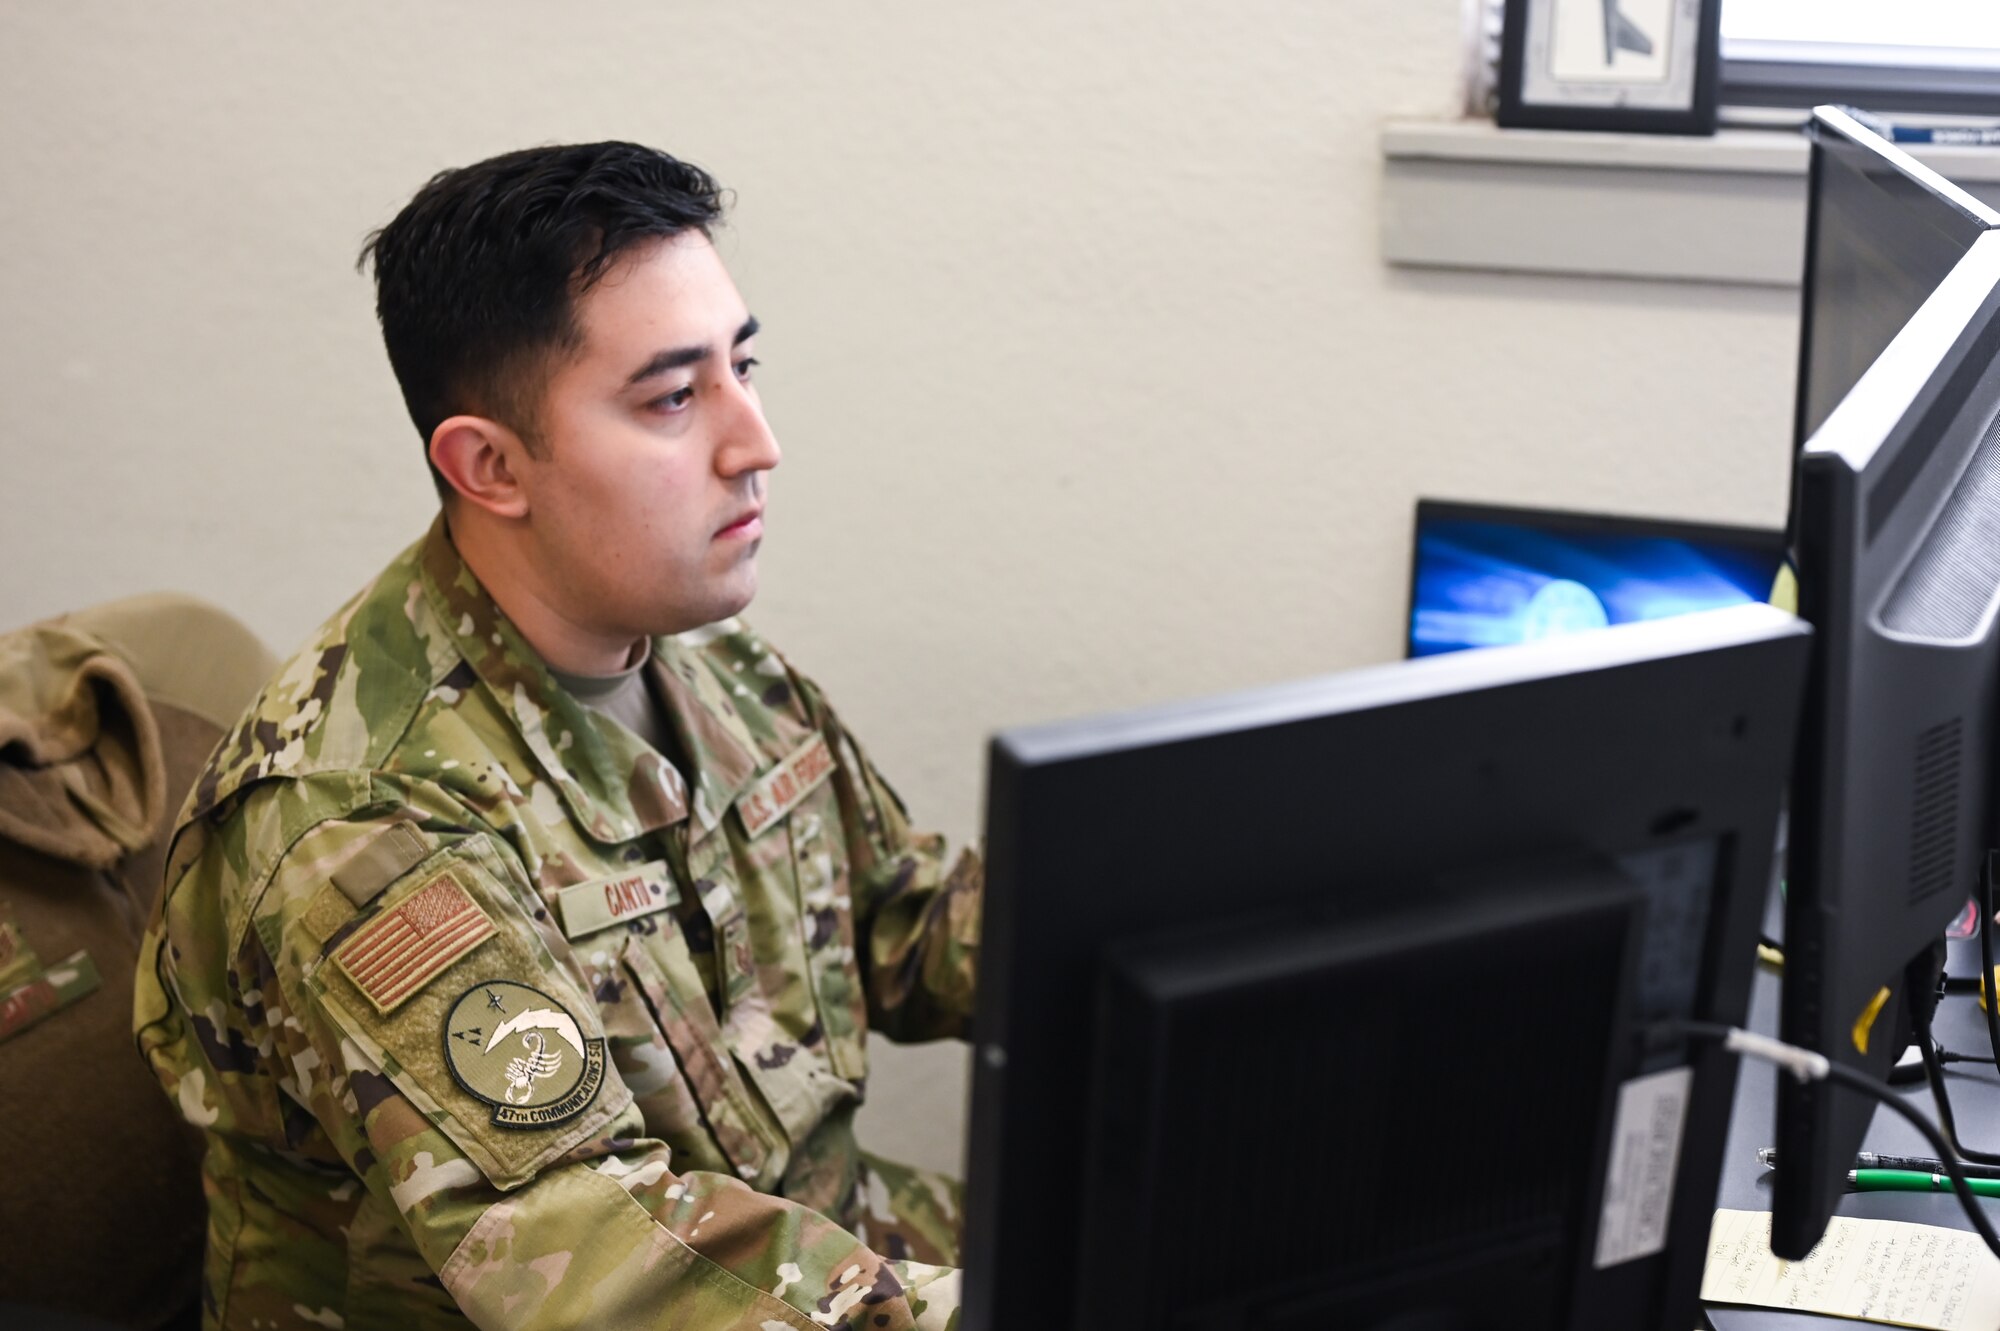 U.S. Air Force Staff Sgt. Gustavo Cantu, 47th Communications Squadron knowledge management technician, types on a computer at Laughlin Air Force Base, Texas, on April 17, 2023. The records management program provides evidence and accountability of Laughlin AFB to the public, Congress, and the Department of Defense. (U.S. Air Force photo by Airman 1st Class Keira Rossman)